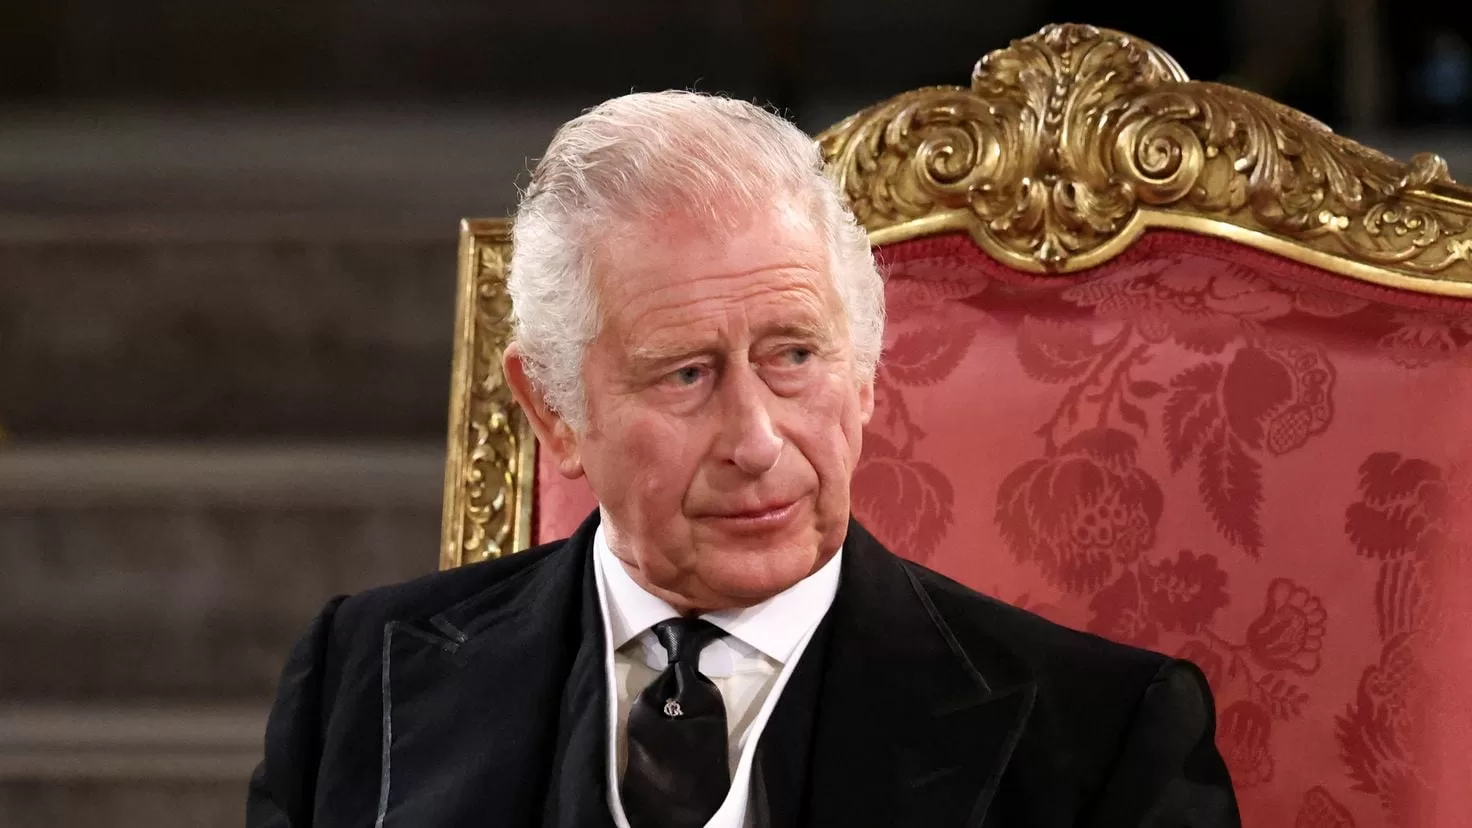 Charles III of England, diagnosed with cancer
